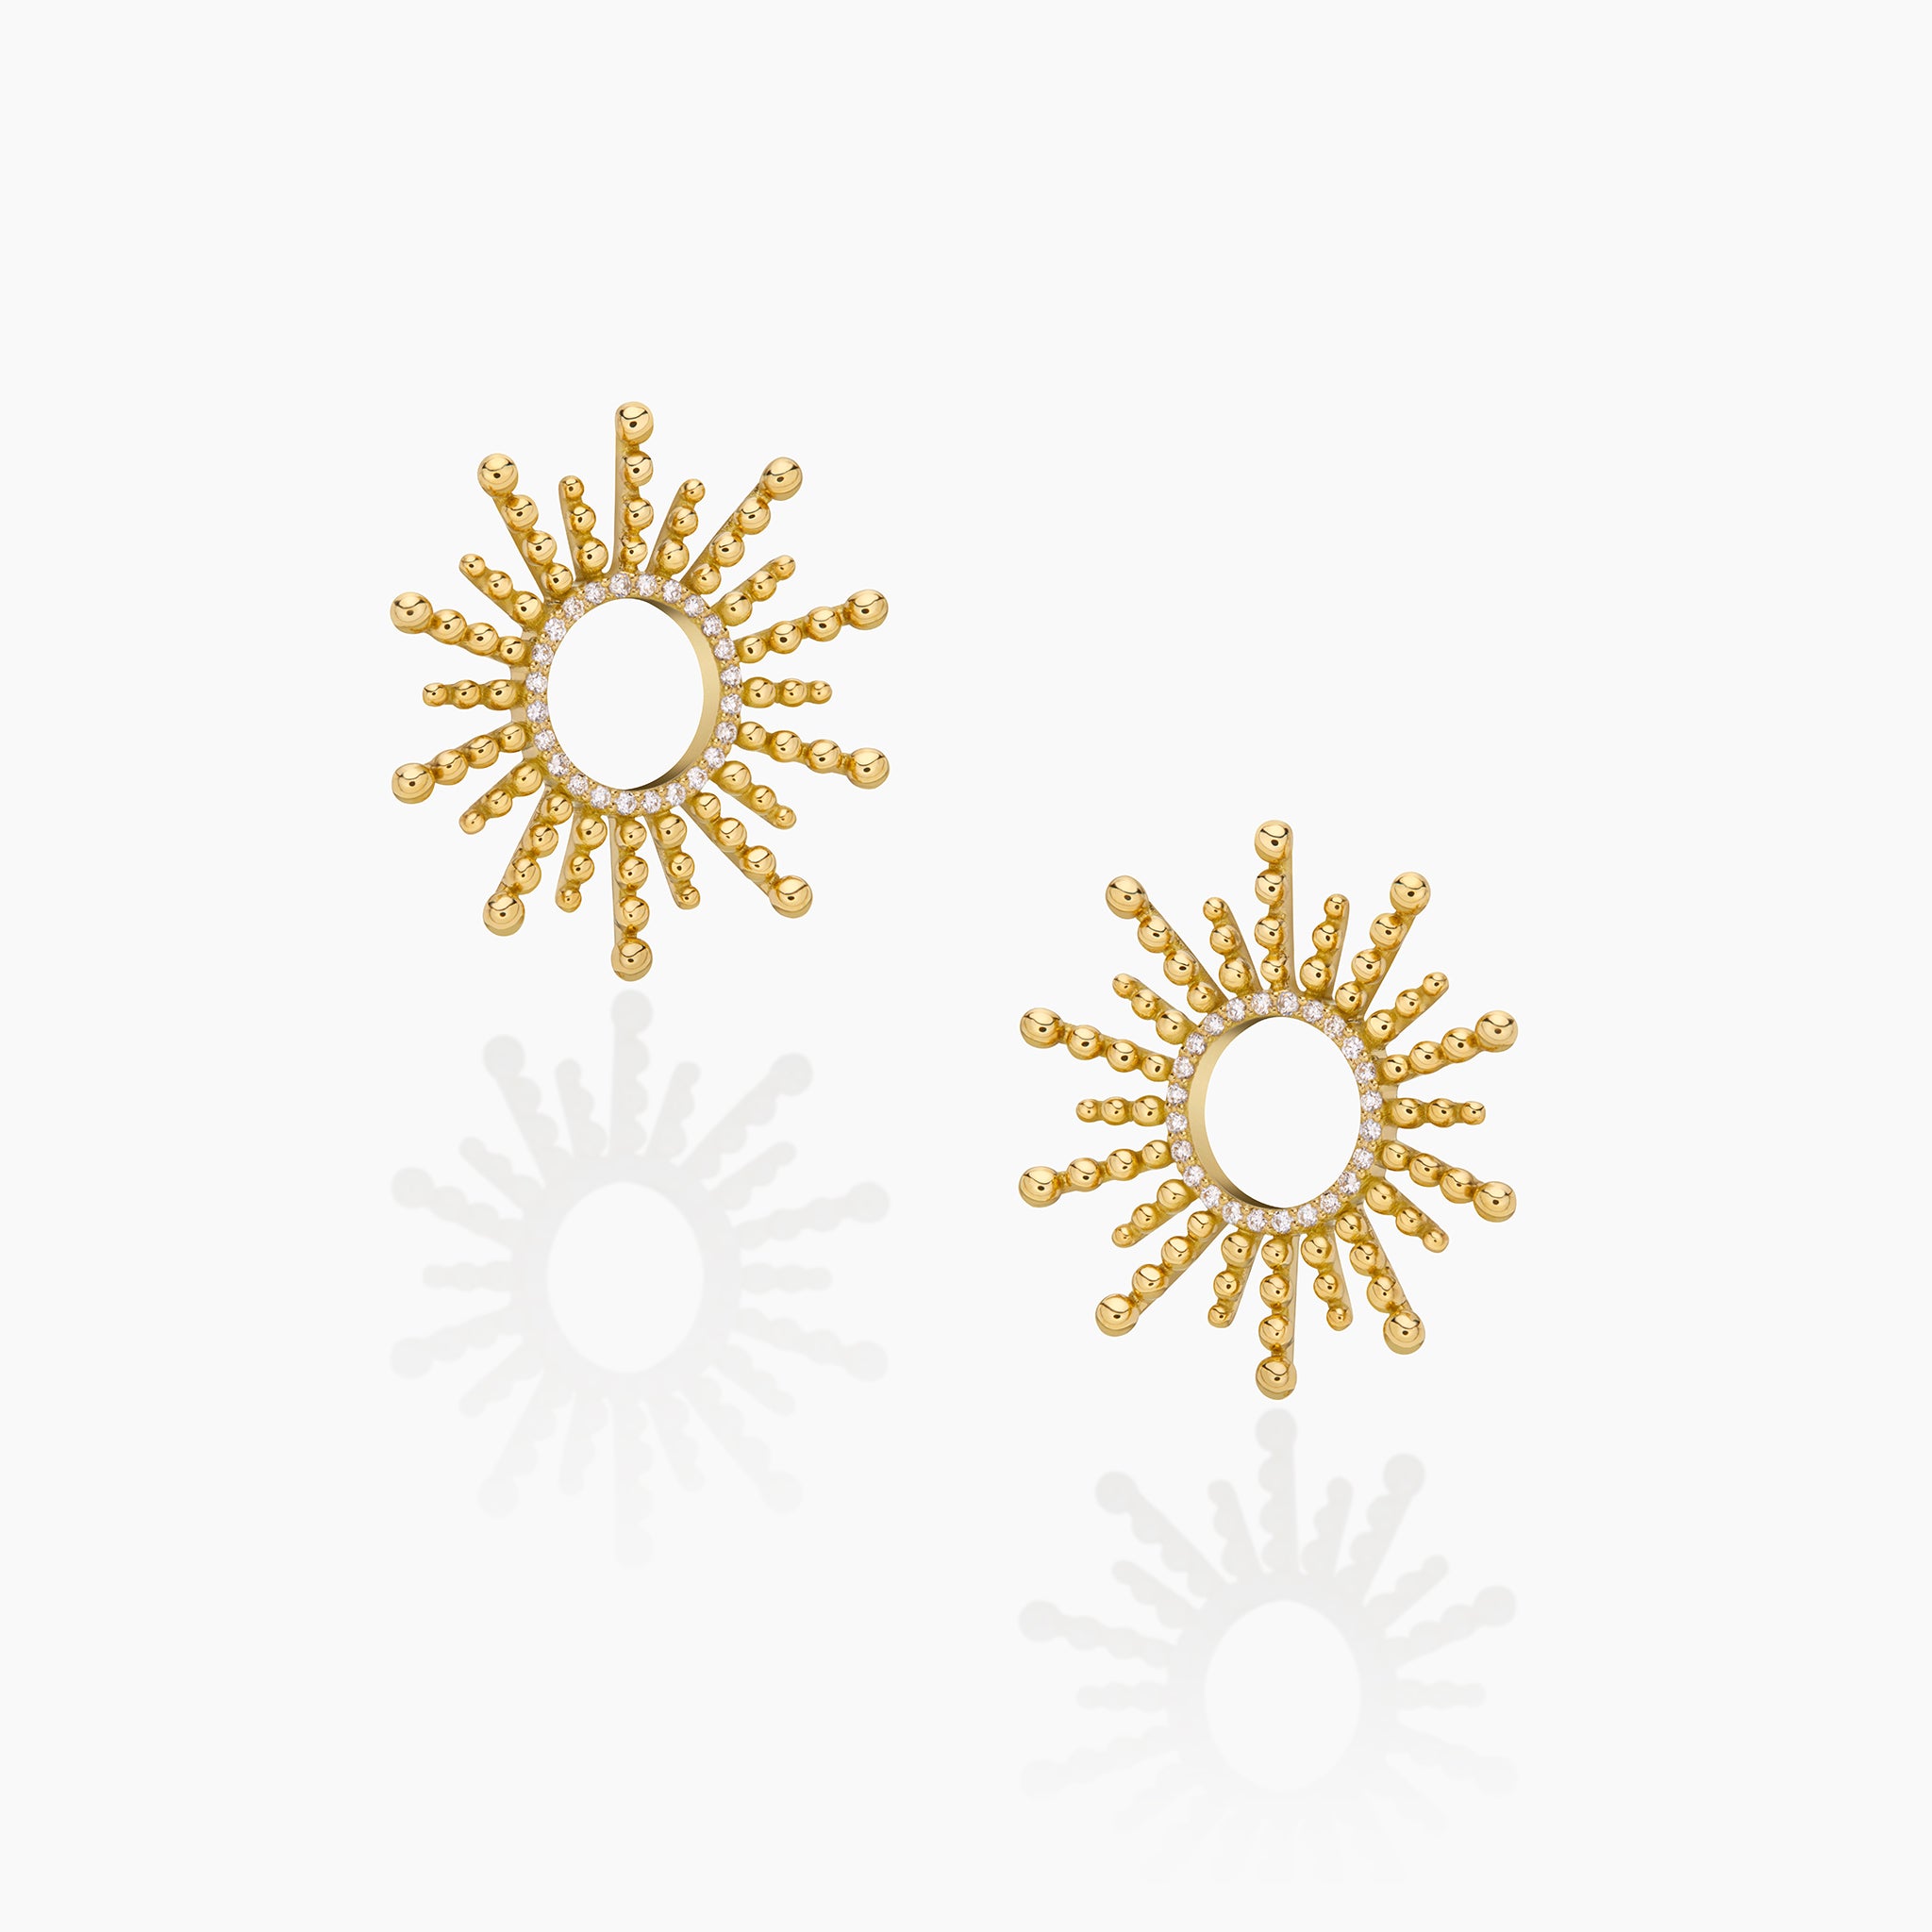 Sea urchin-inspired yellow gold earrings with diamonds, showcased on an off-white background.